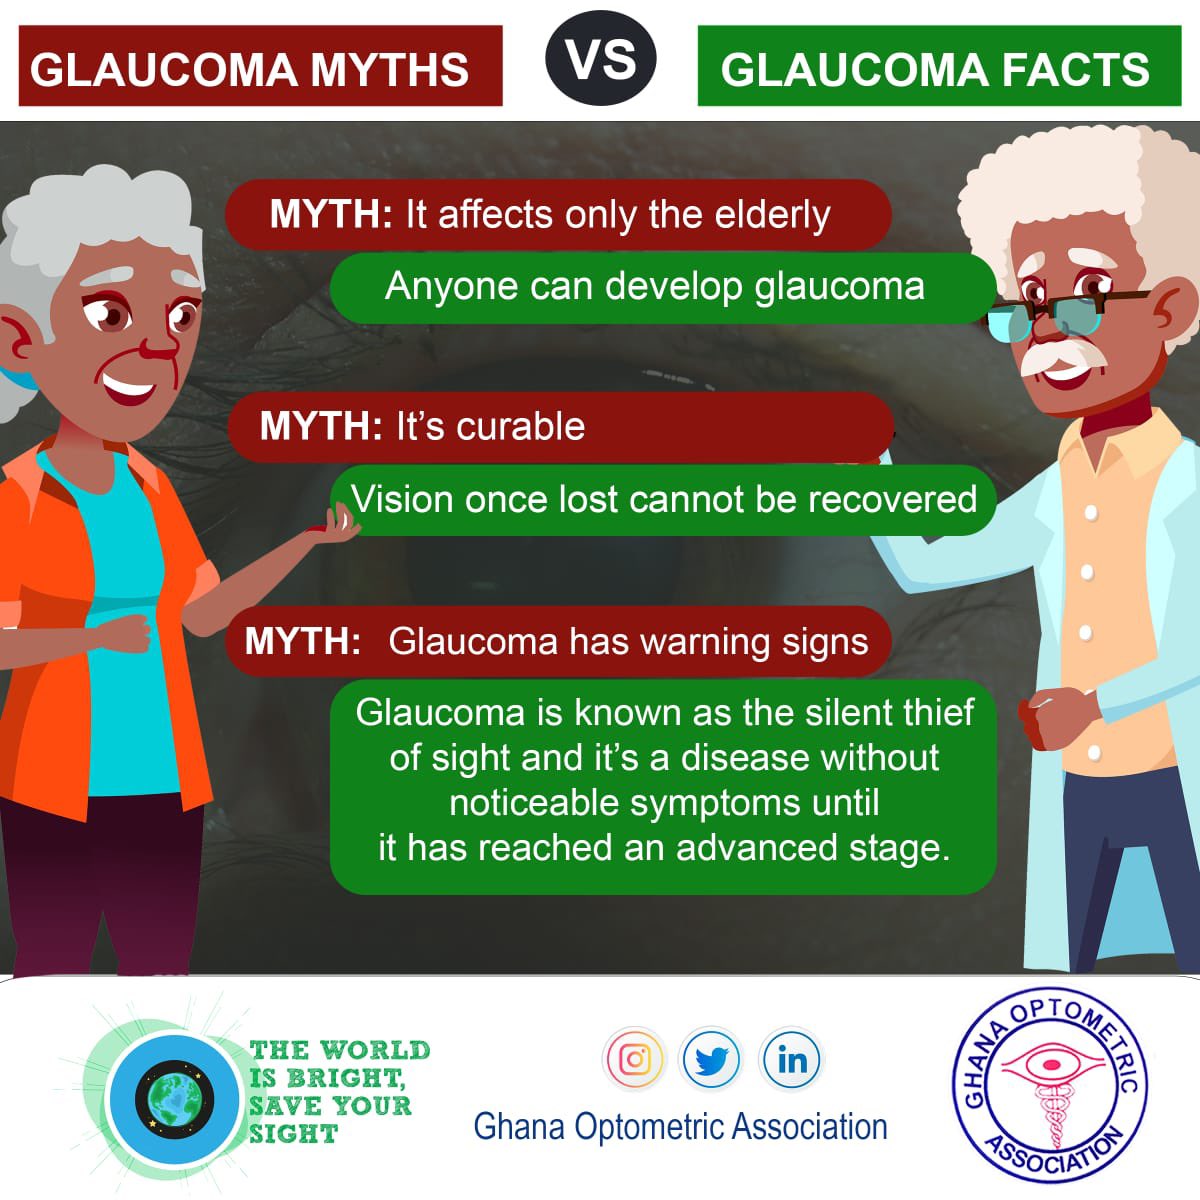 Some myths❌ versus facts✅ about GLAUCOMA

#WorldGlaucomaWeek
#EyeHealth
#Optometrists